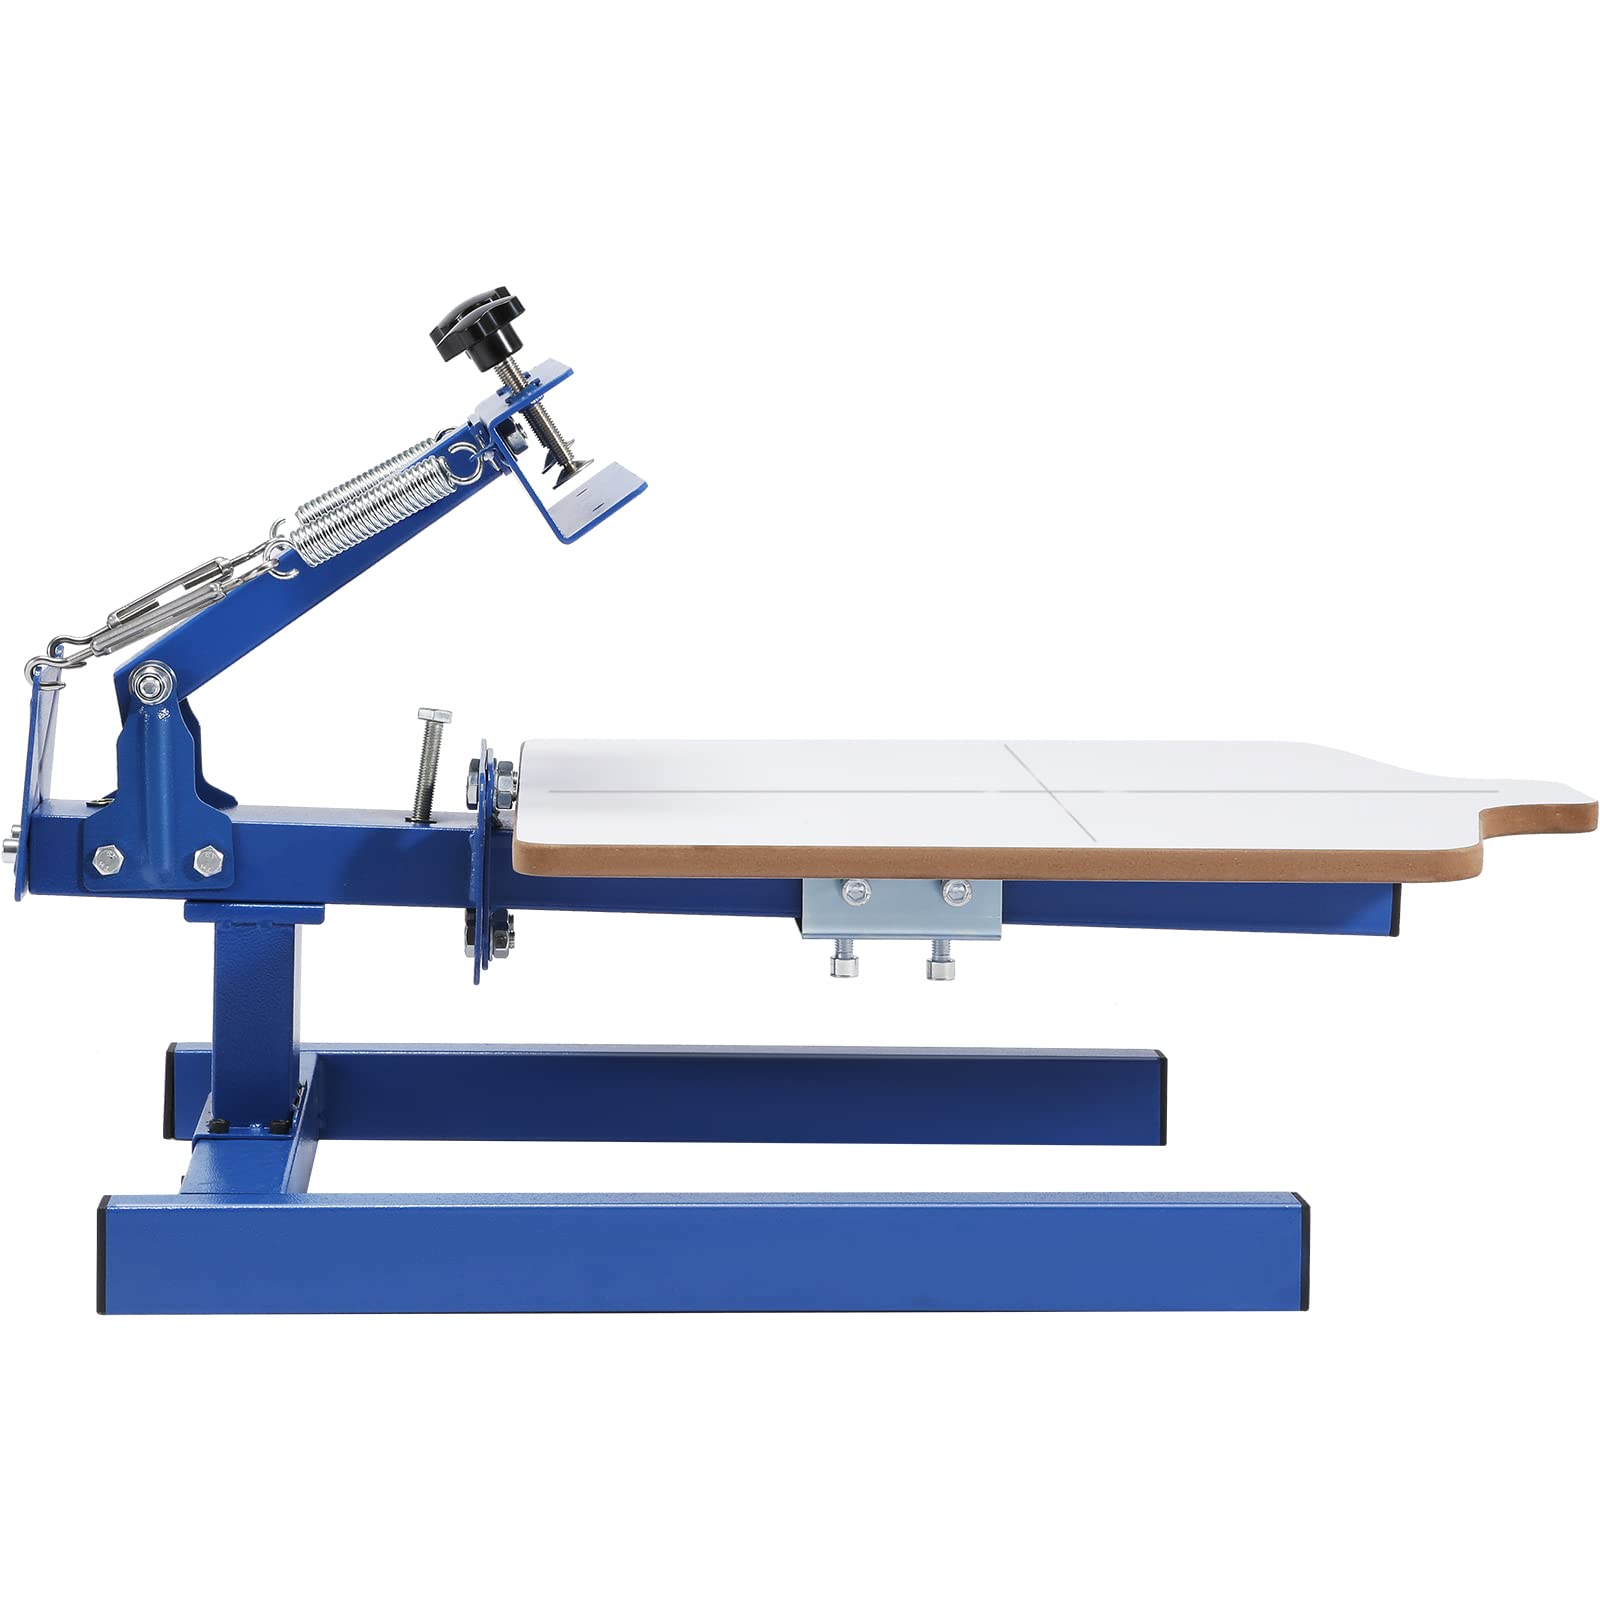 VEVOR Screen Printing Machine, 1 Color 1 Station Silk Screen Printing Press, 21.2x17.7in / 54x45cm Screen Printing Press, Double-Layer Positioning Pallet, Adjustable Tension for T-Shirt DIY Printing